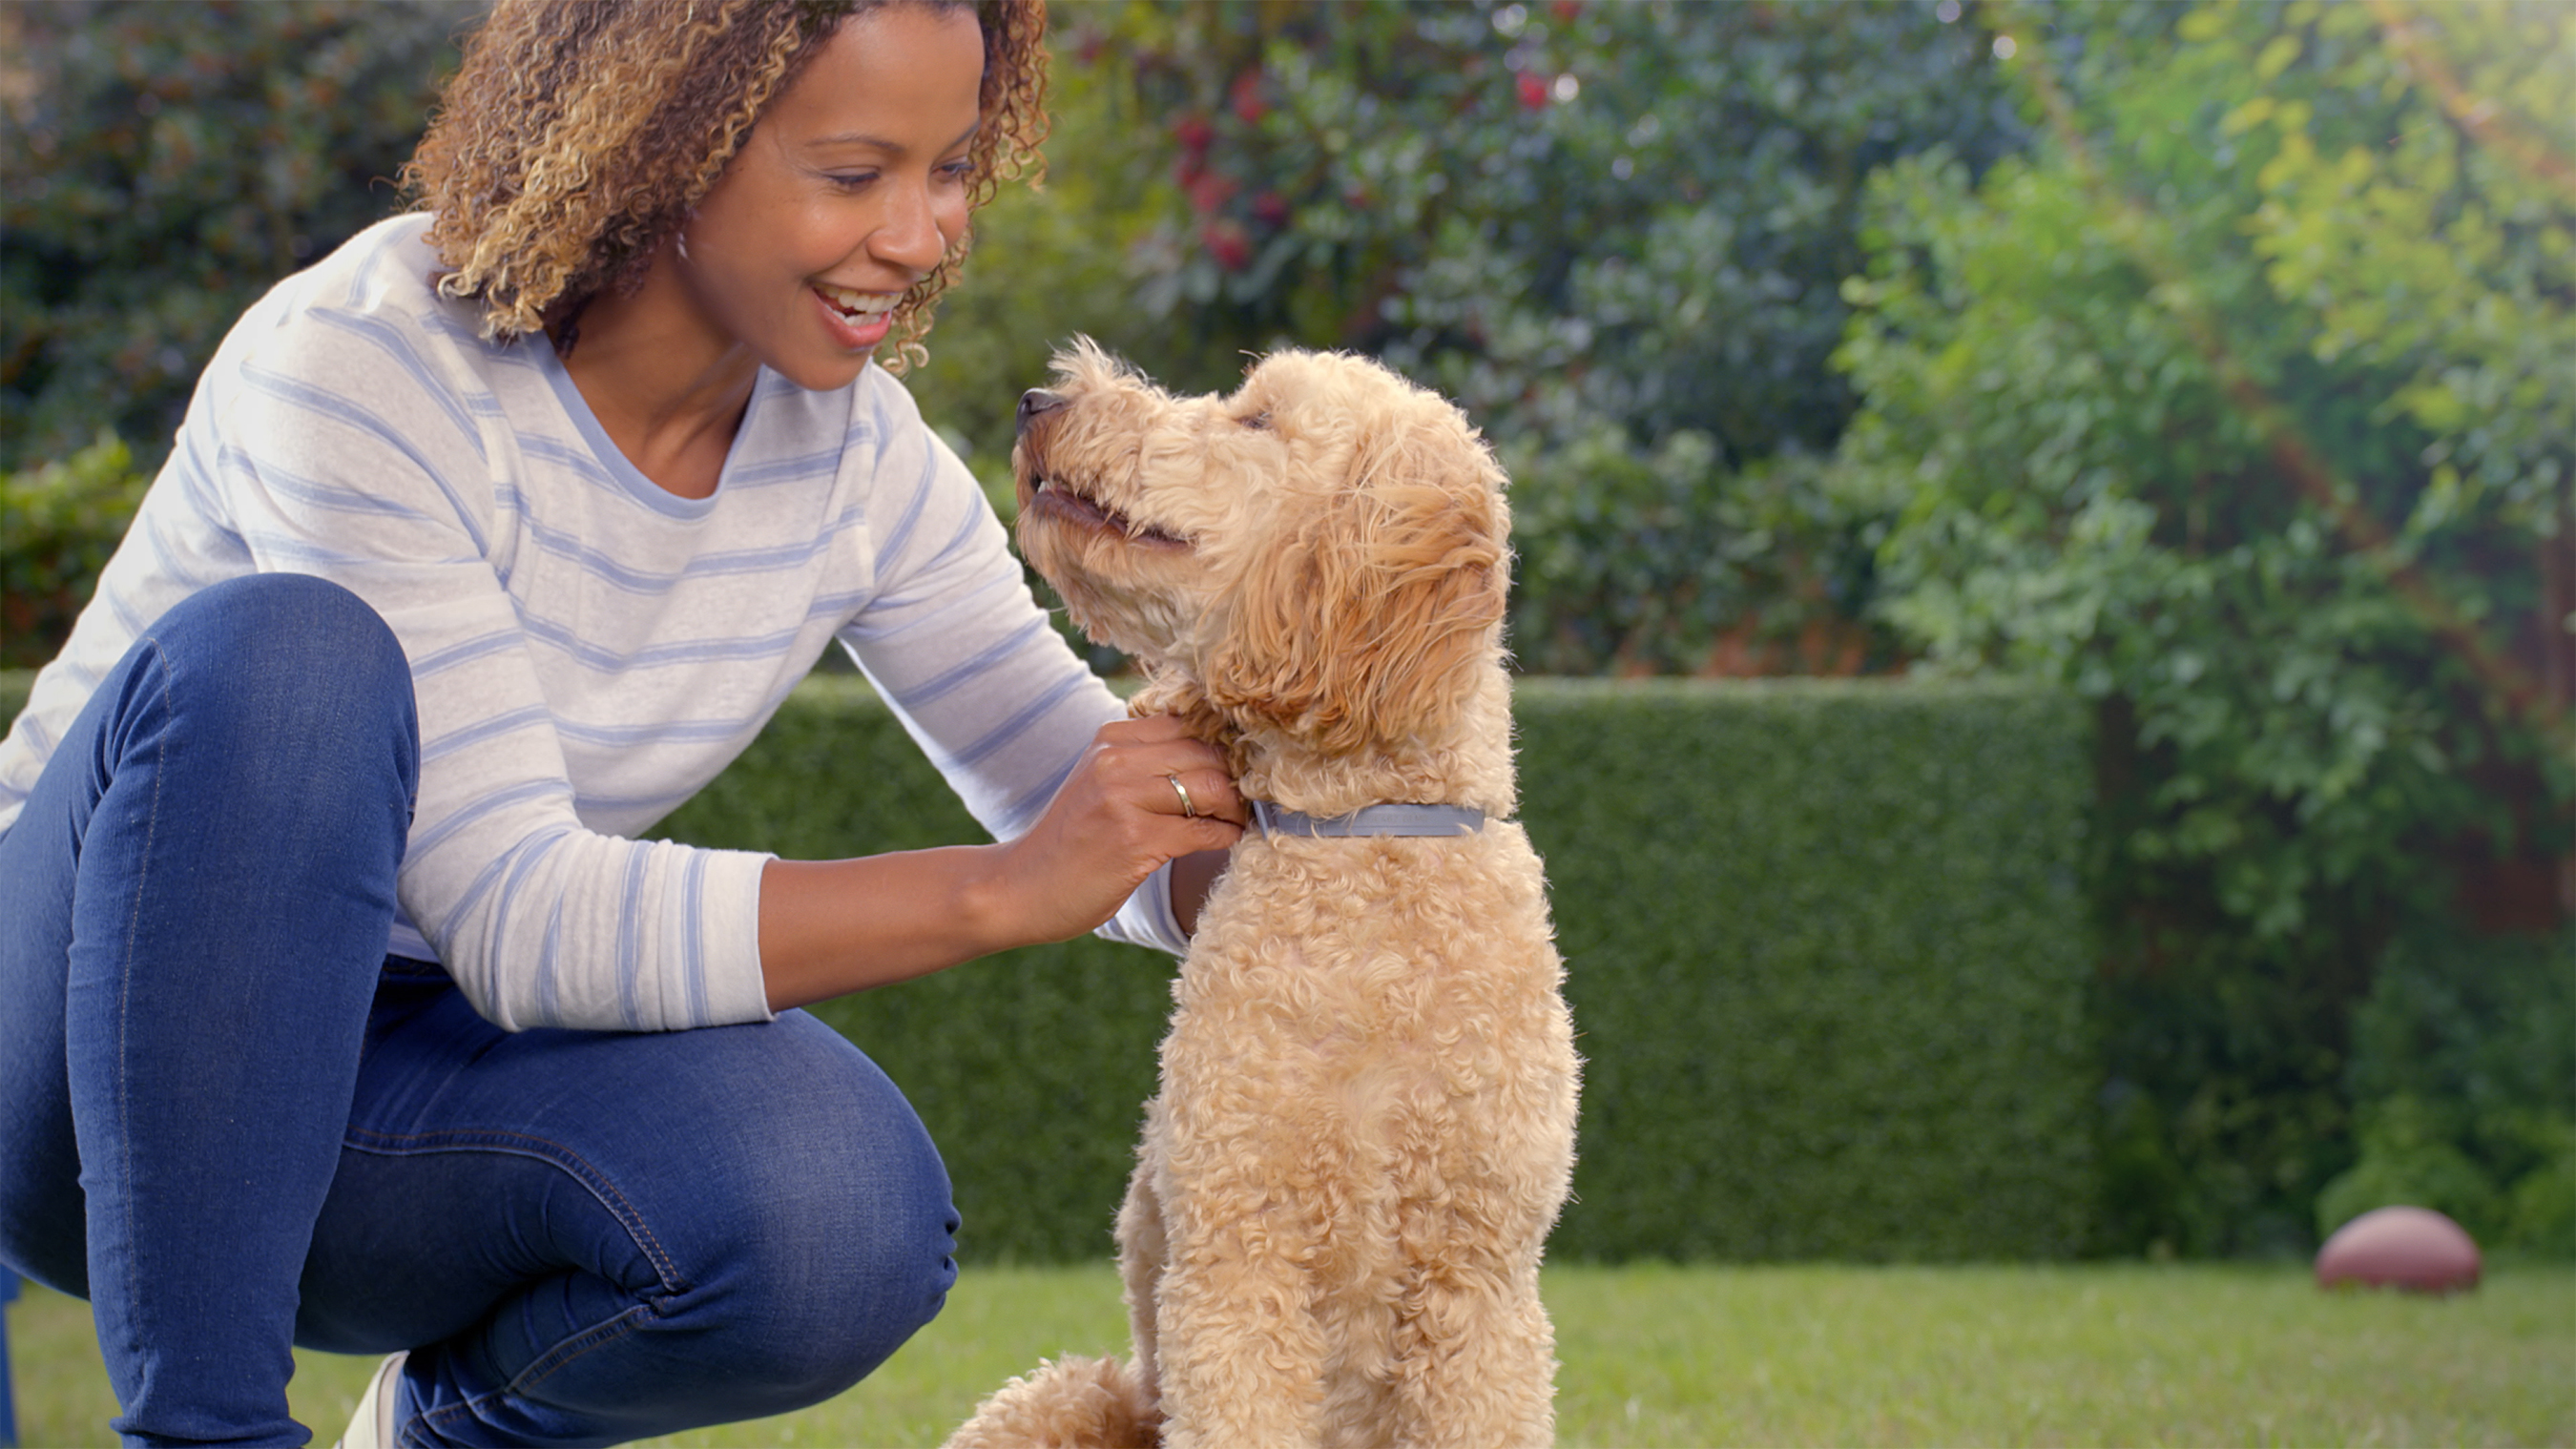 There are so many fun activities to enjoy with your pet at this time of year, from autumn hikes to celebrating Halloween. To enjoy these joyful moments pest-free, let’s clear up some common flea and tick myths.